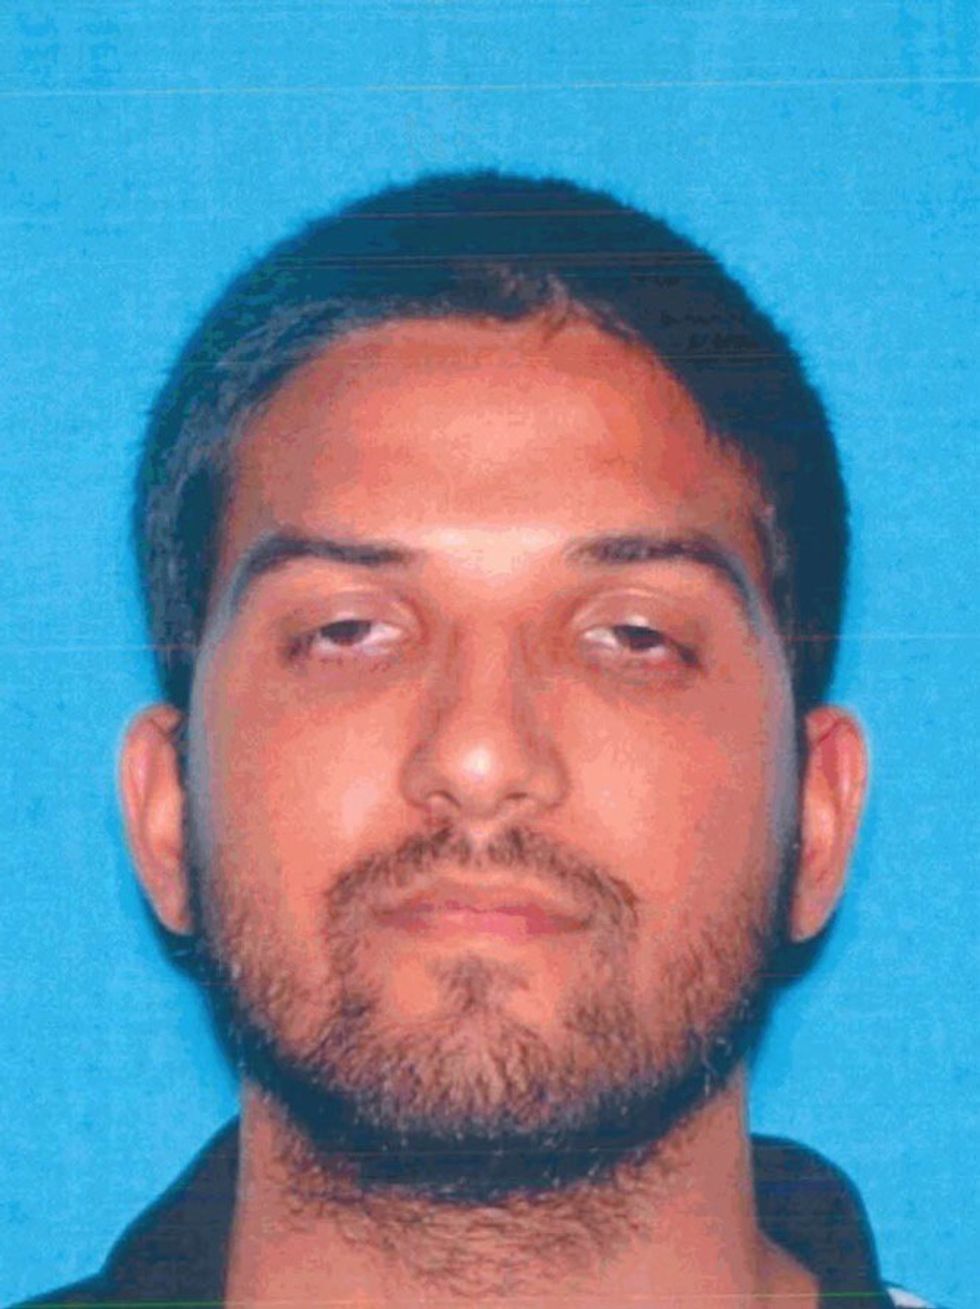 Hunt for a Third Terrorist? Officials Say San Bernardino Attacker Syed Farook Planned Earlier Attack on Specific Target With Someone Else